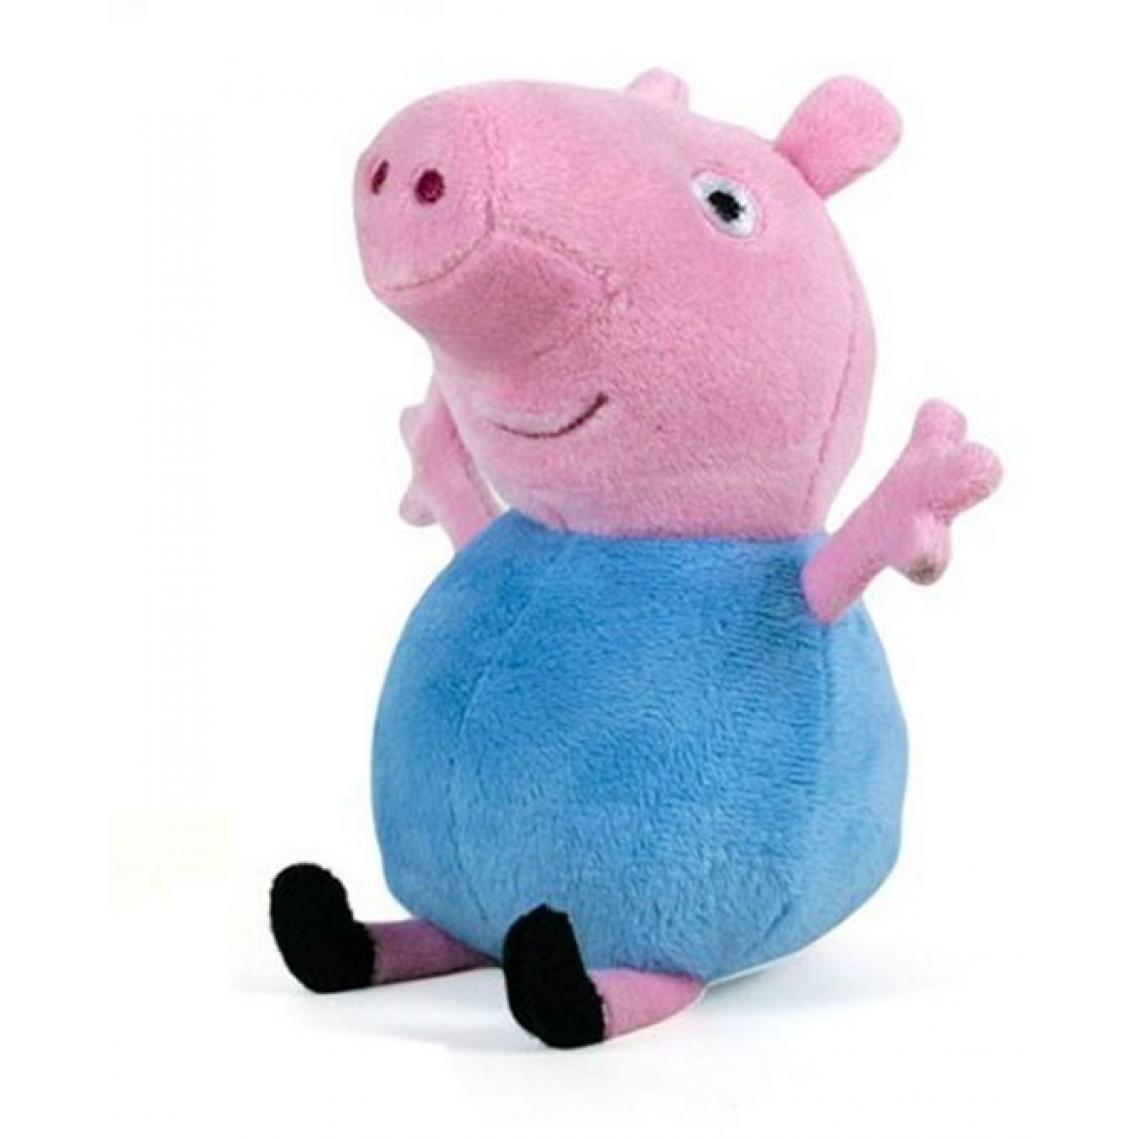 Play By Play - Play by play - Peluche George le frère de Peppa Pig - 31 cm - Héros et personnages